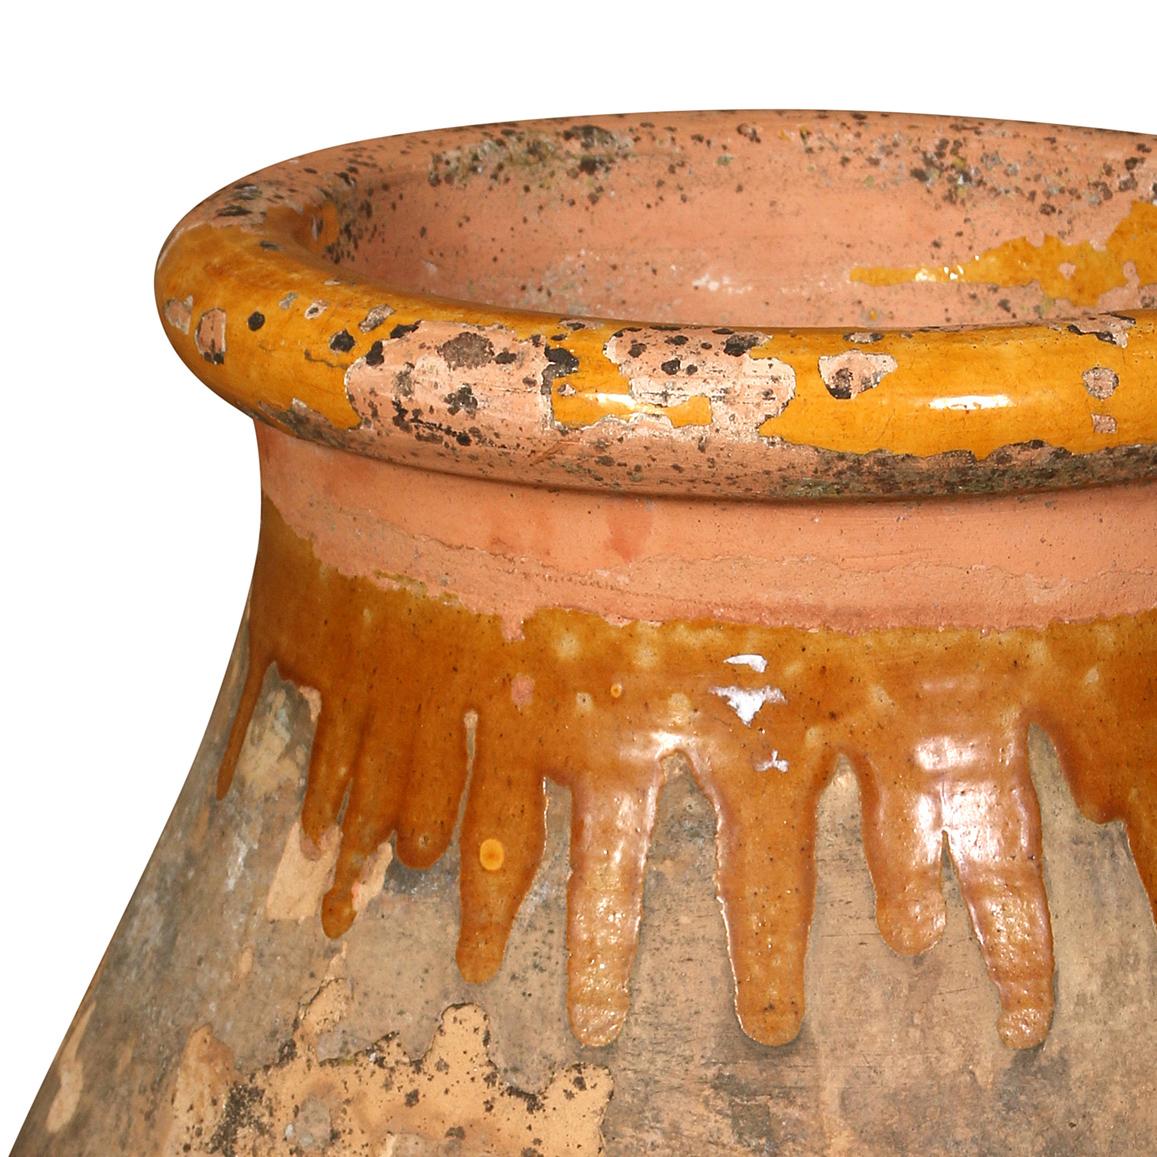 A terracotta olive jar with a wonderful mustard yellow glaze dripping from the top.  This piece has stood the test of time and has acquired a wonderfully aged patina.  It can stand alone as a decorative objet or can serve as a planter or even an